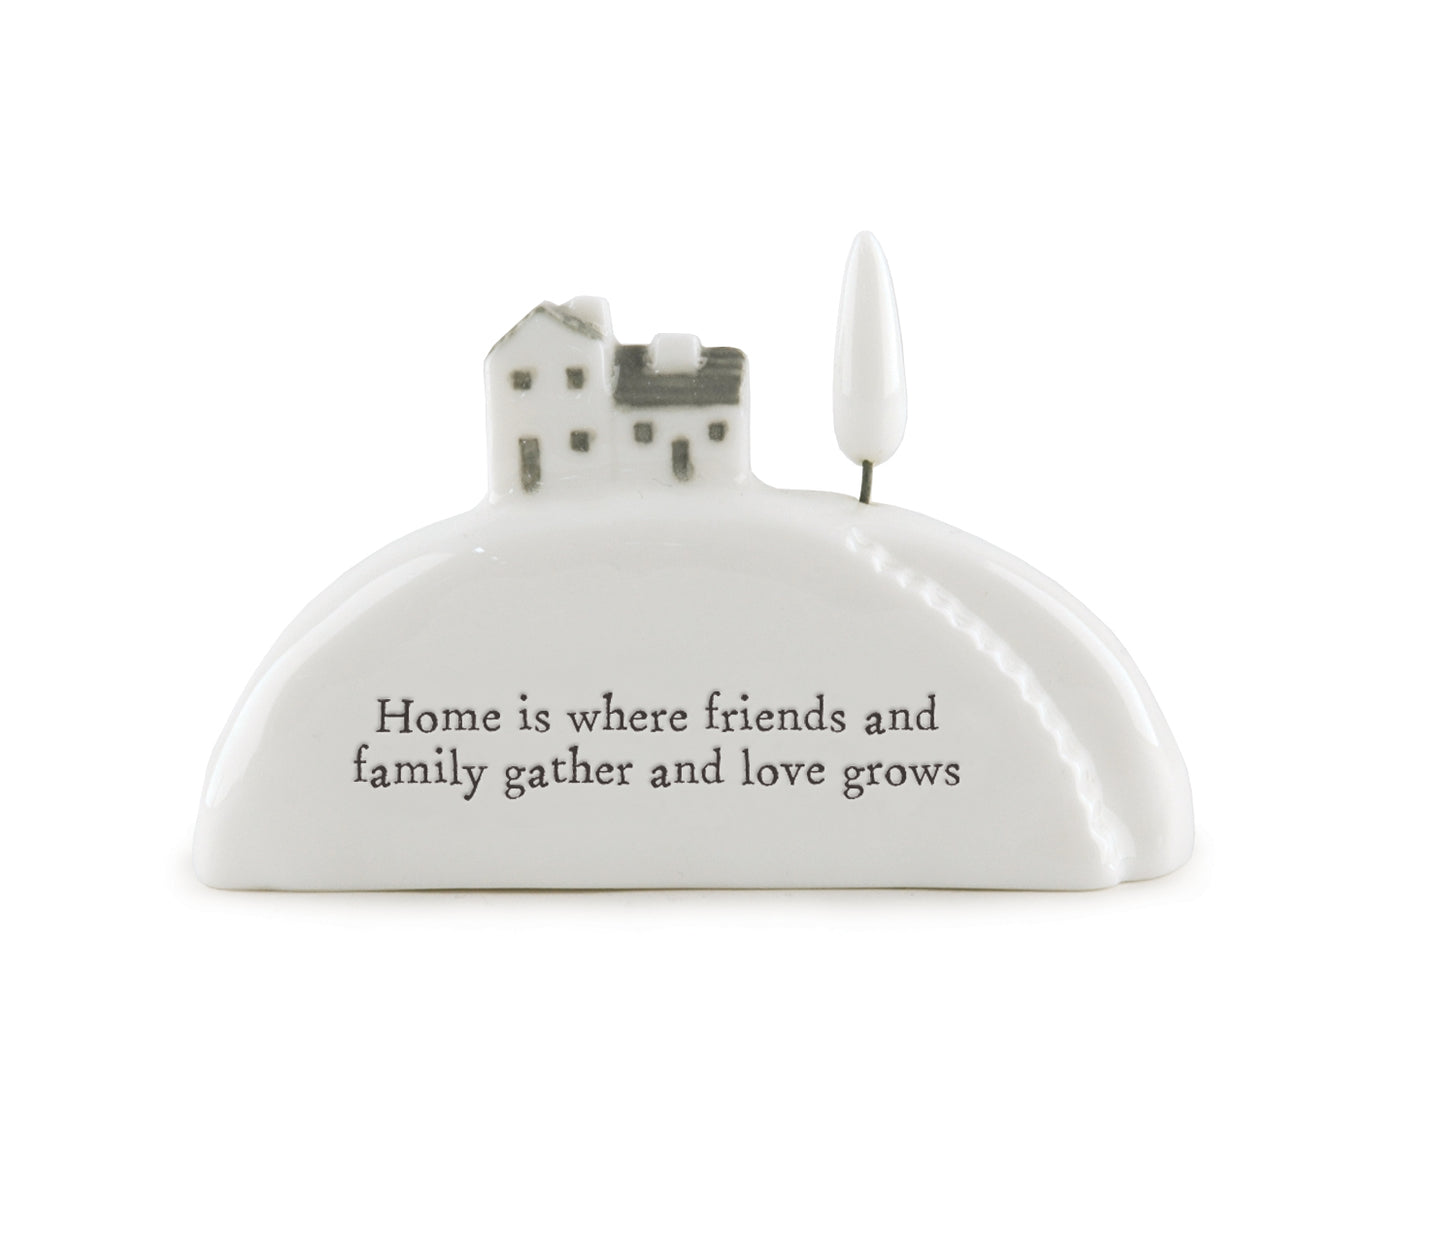 East Of India Home Is Where Love Grows Ceramic House On Hill Inside Box